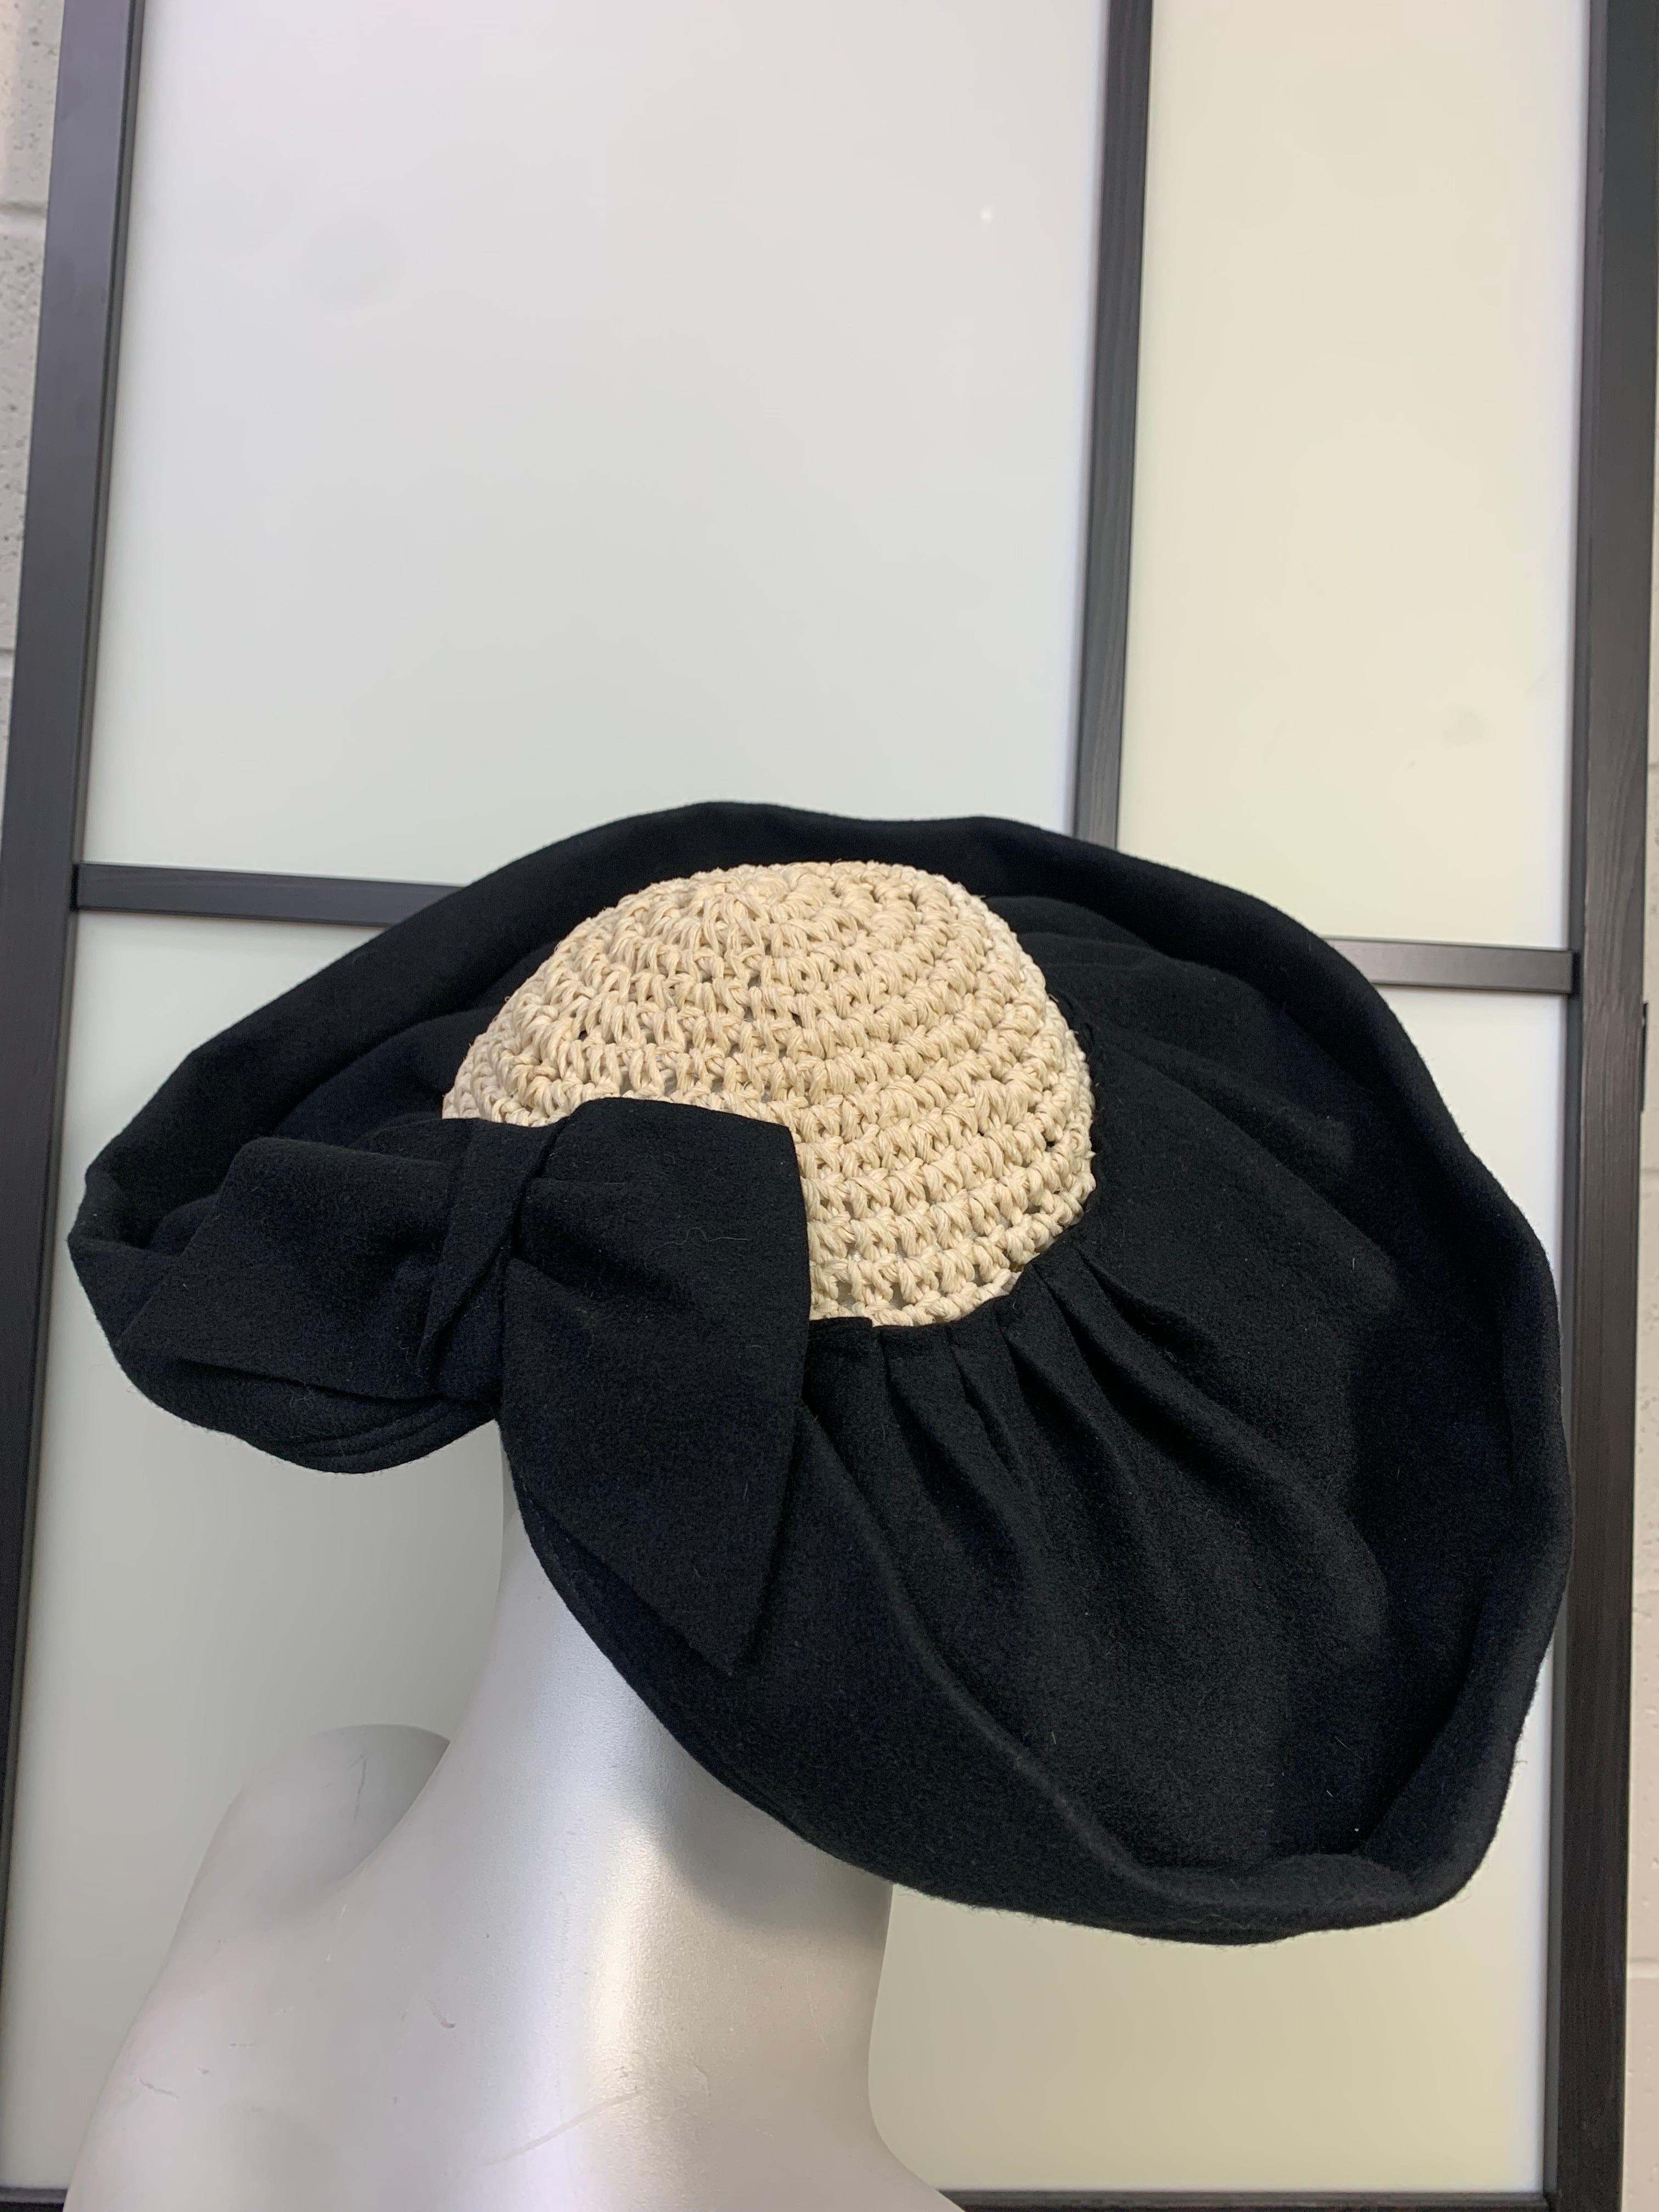 1940s Black Felt & Cream Crochet Halo Crown Hat w Broad Front Brim: Lushly pleated wool felt brim is shallow at back with a felt bow in center. Crown is a hand-crocheted, shallow beanie style, meant to be secured at a jaunty angle with pins and/or